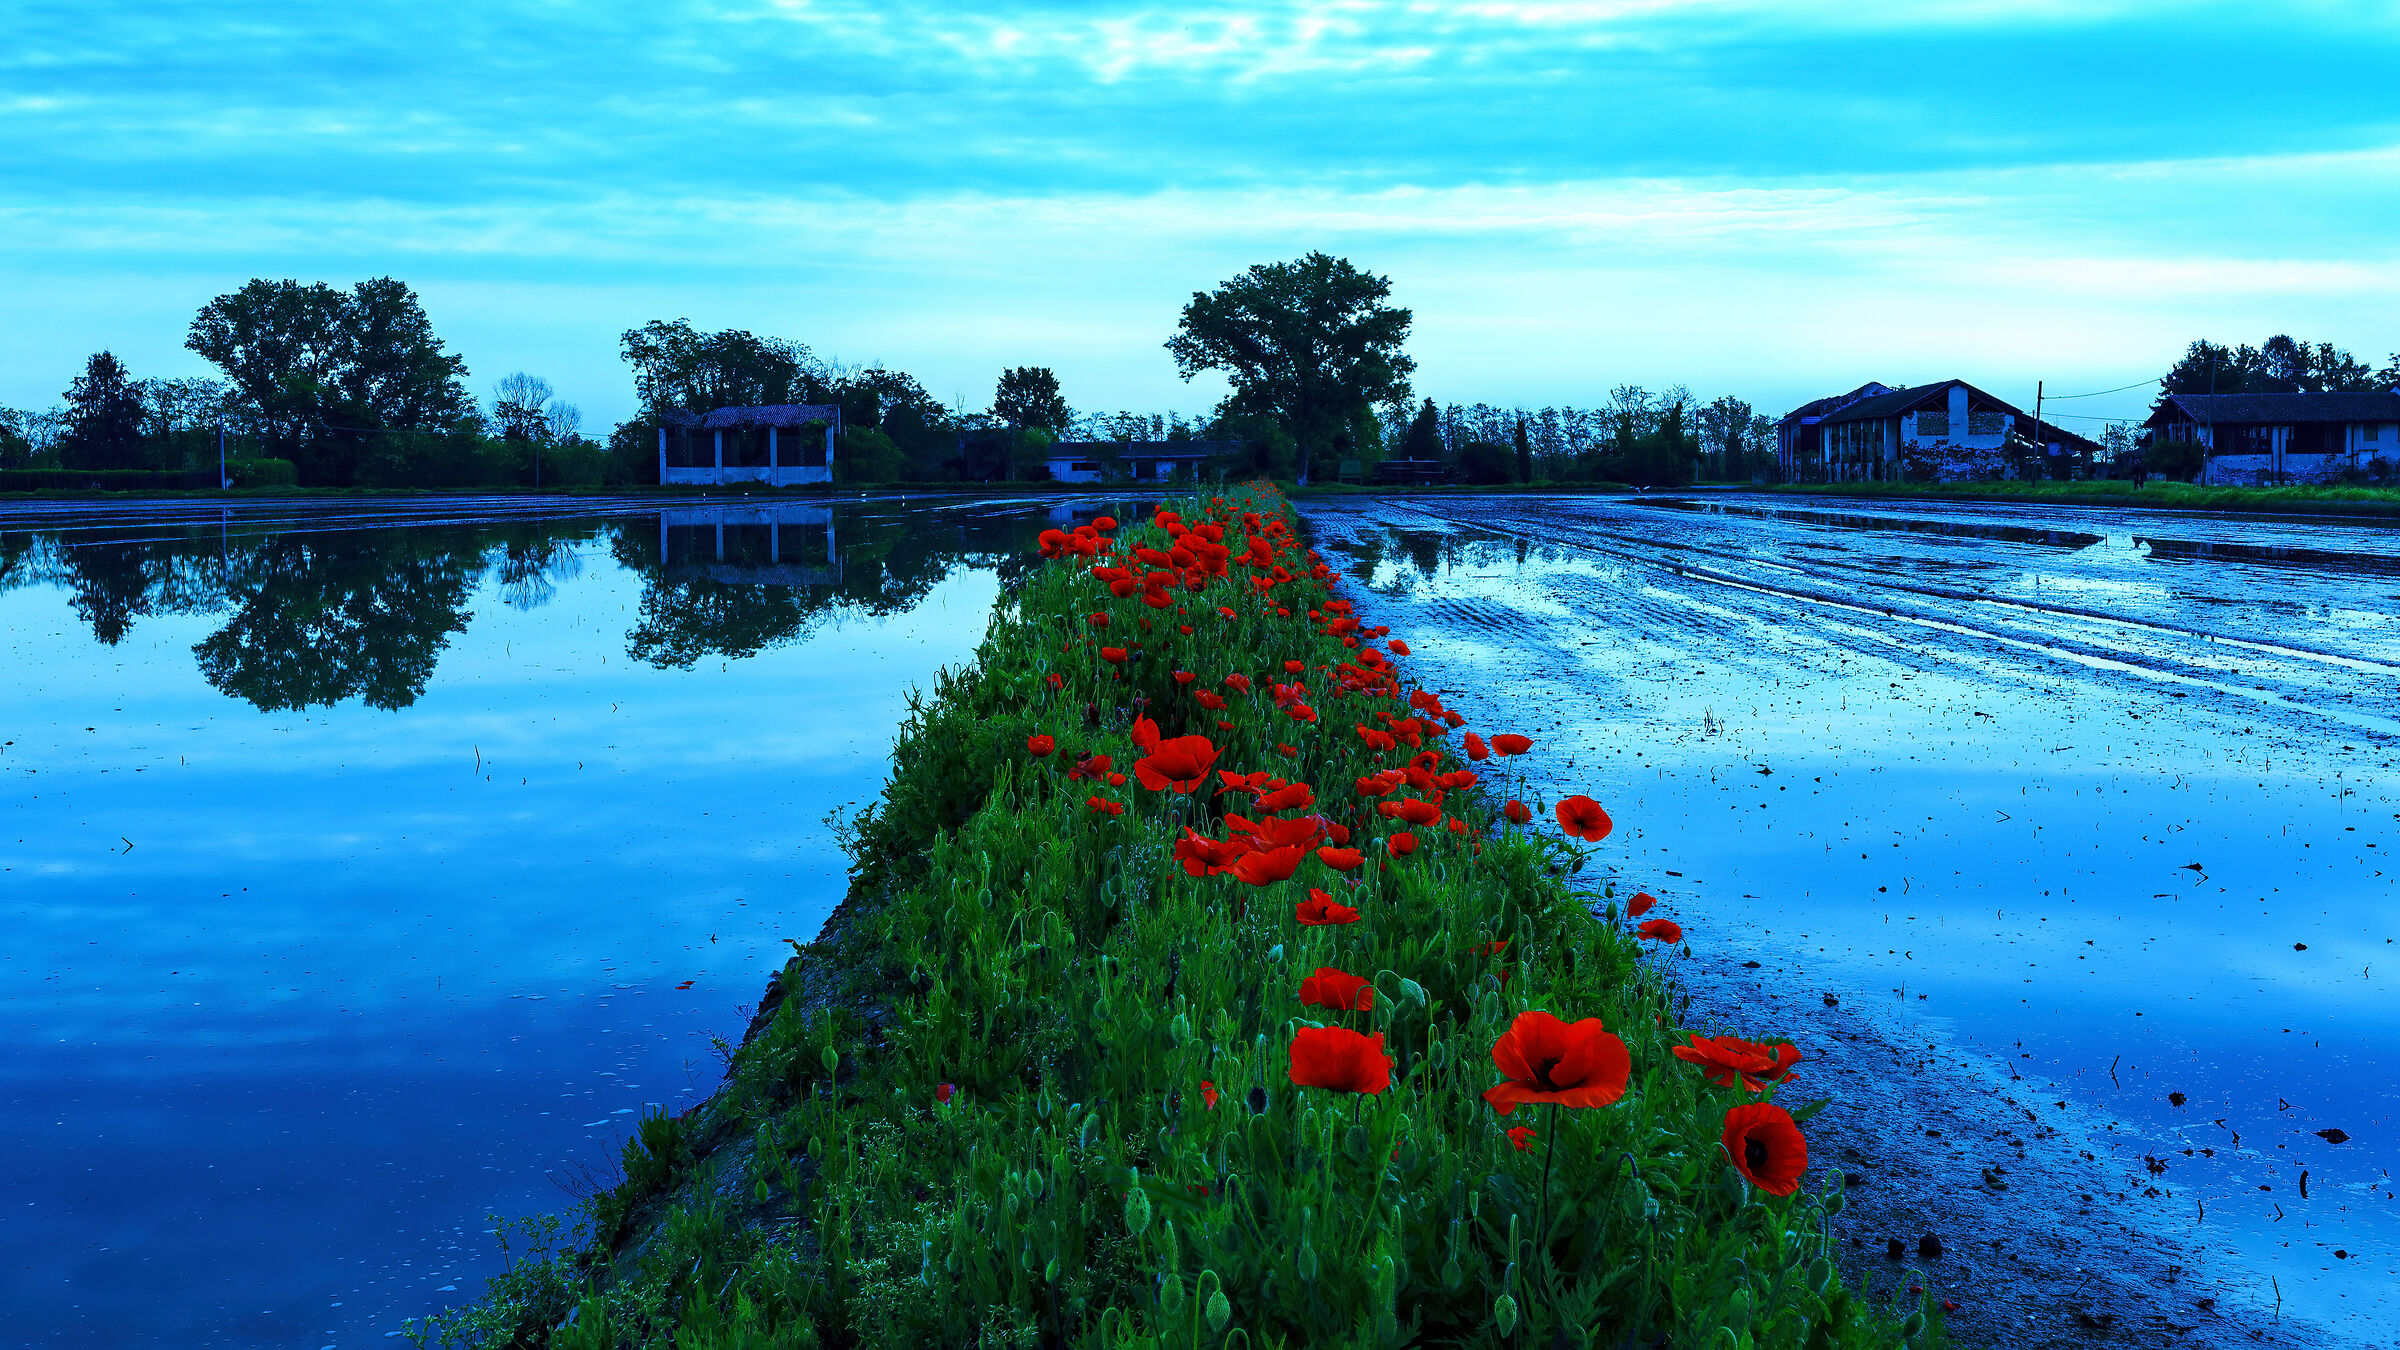 Poppies in blue hour...